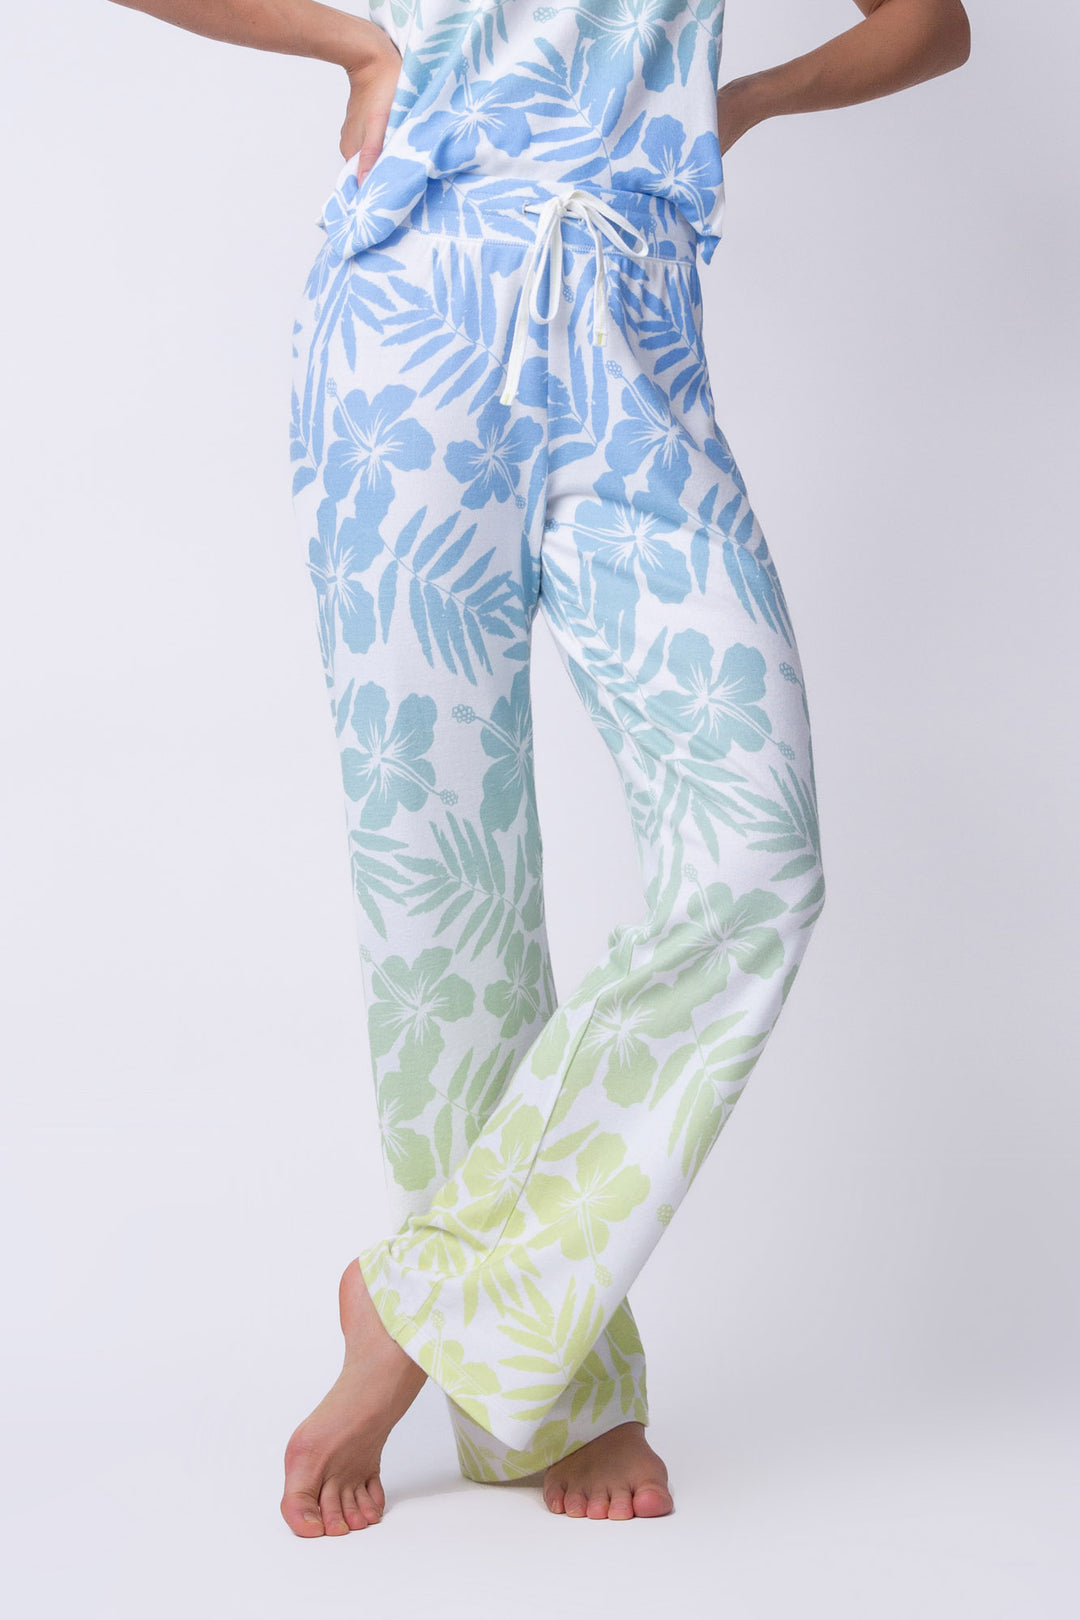 Women's straight leg lounge pant in ivory-blue-green tropical with tie waist.